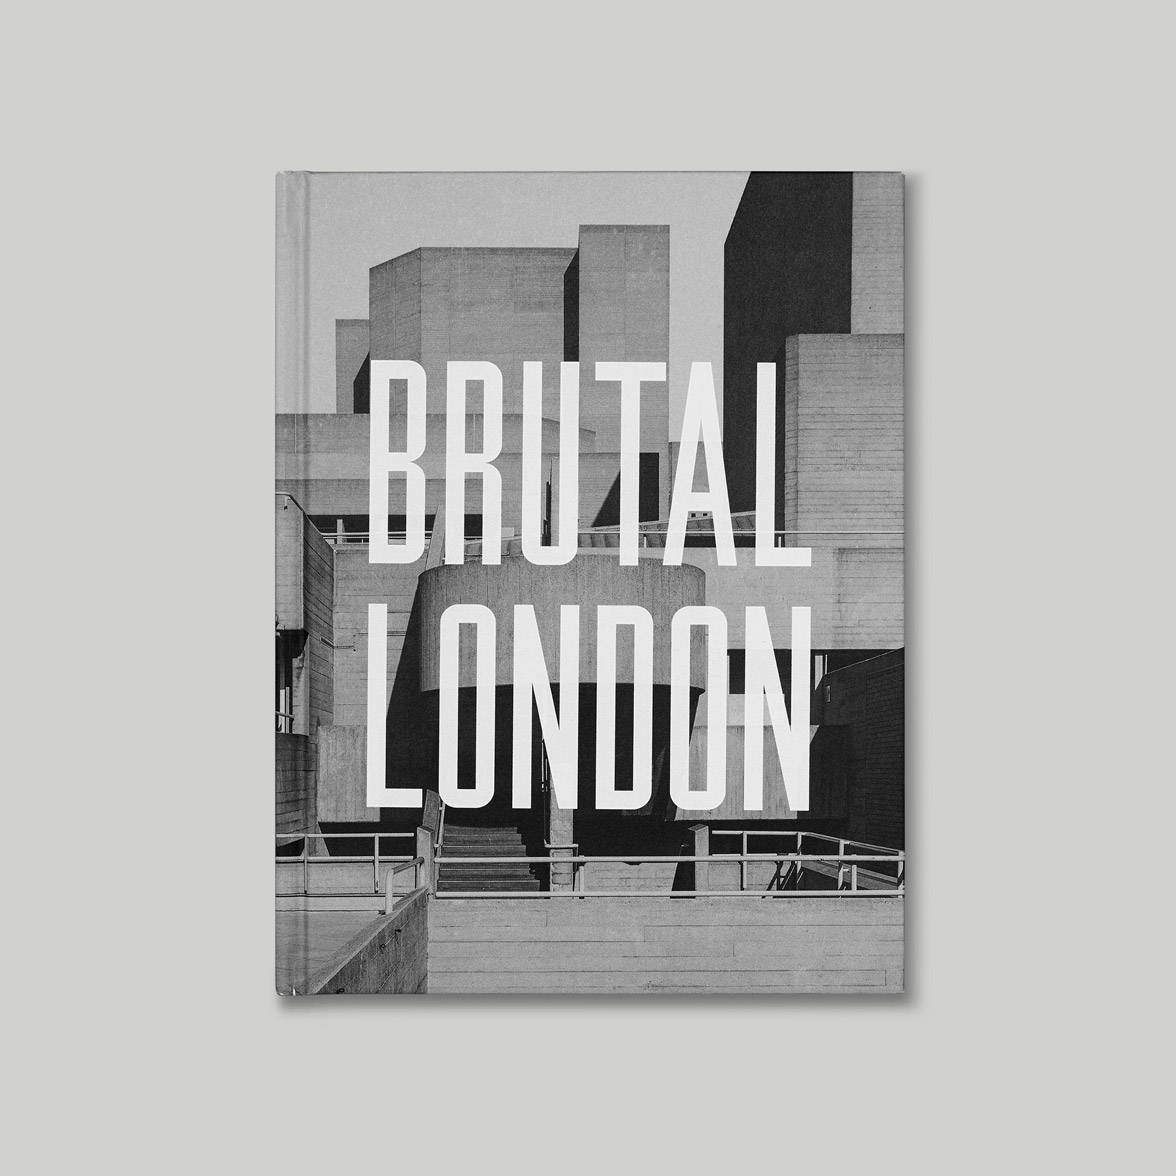 Brutal London book frontcover